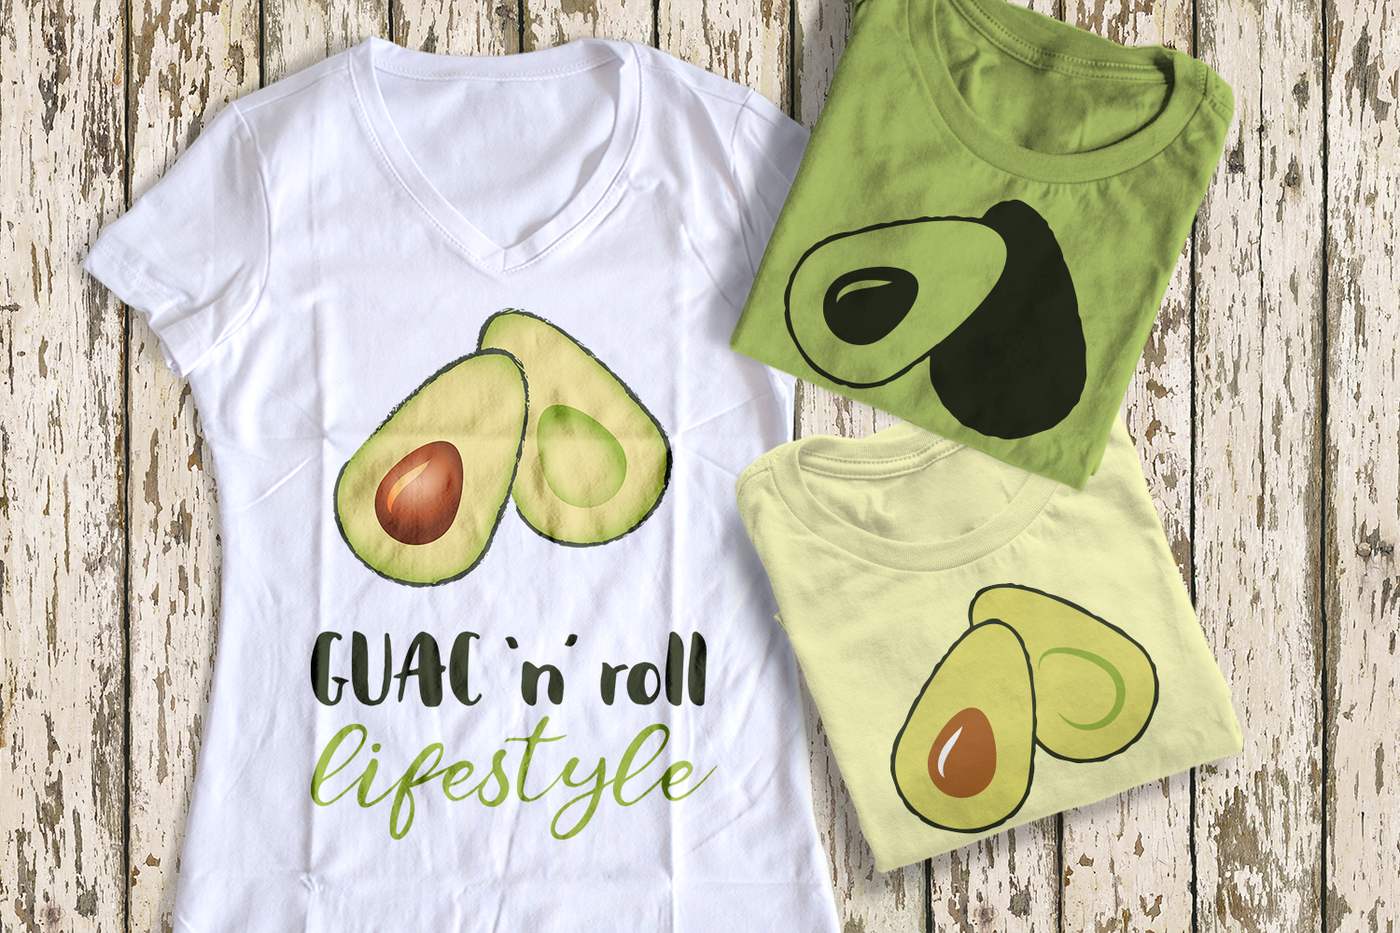 Three folded tees. Each has an image of an avocado sliced in half. One says "Guac 'n' roll lifestyle"